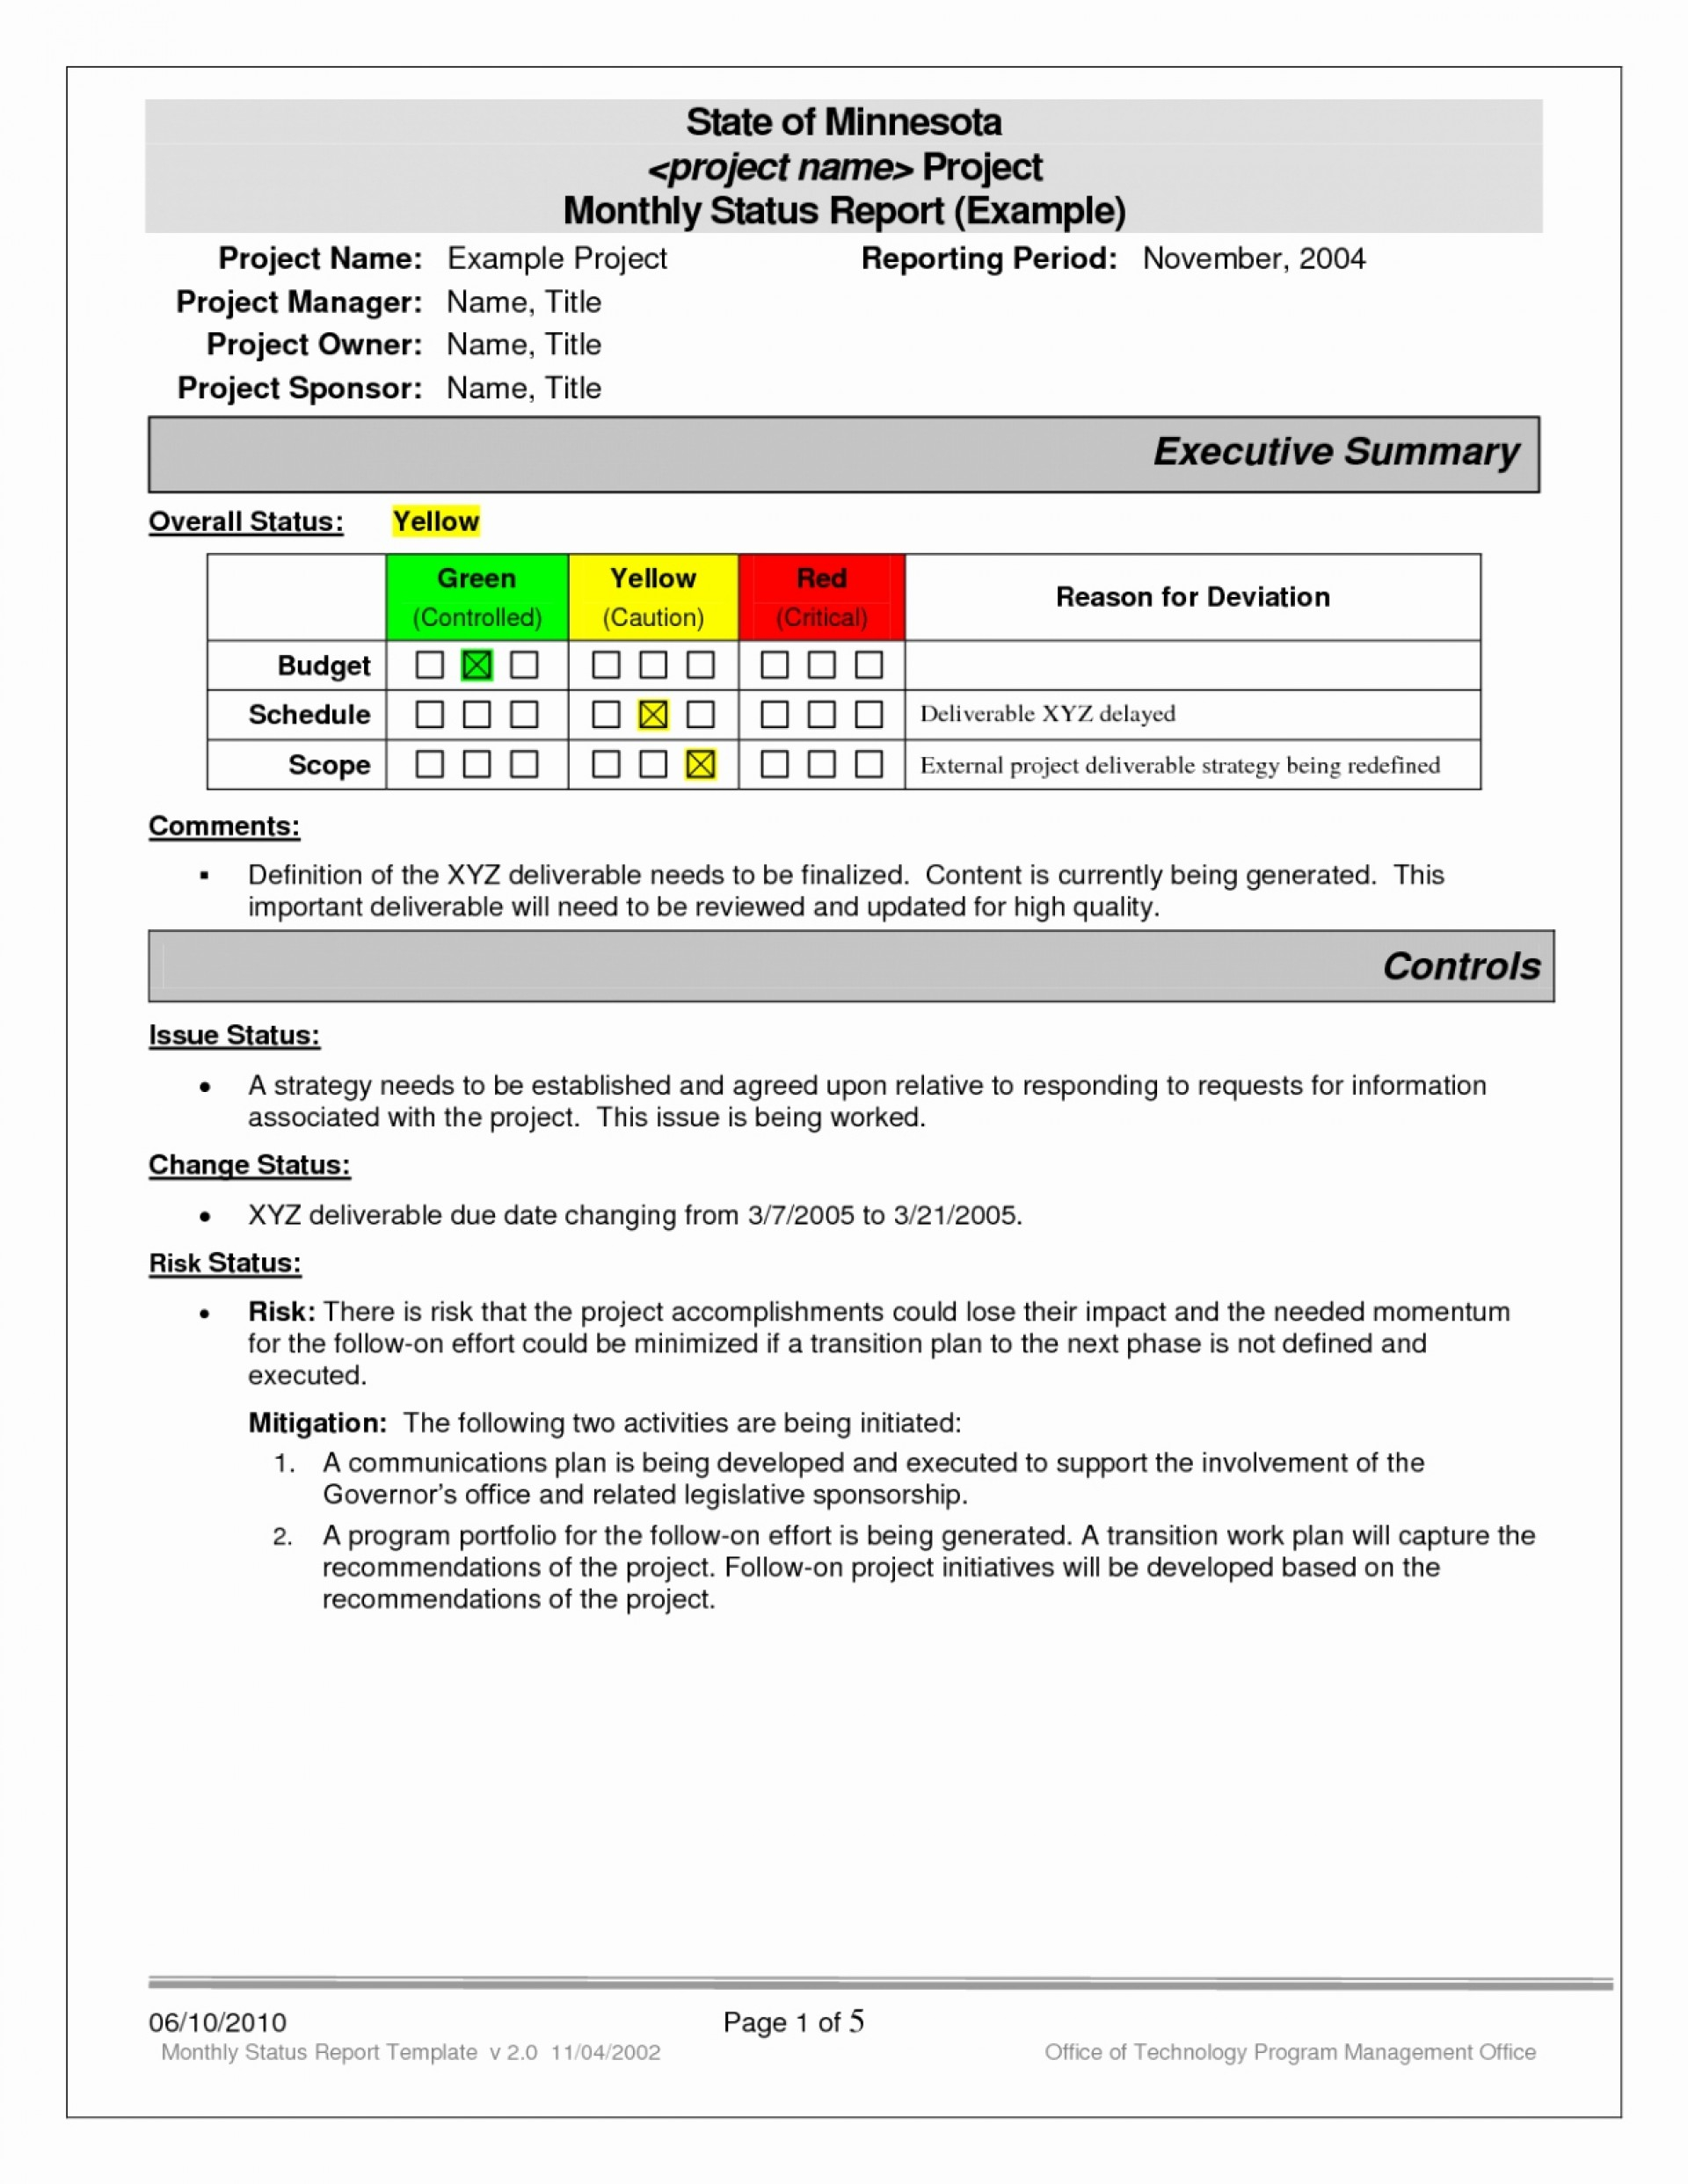 023 Excel Project Status Report Weekly Template 4Vy49Mzf Inside Testing Weekly Status Report Template